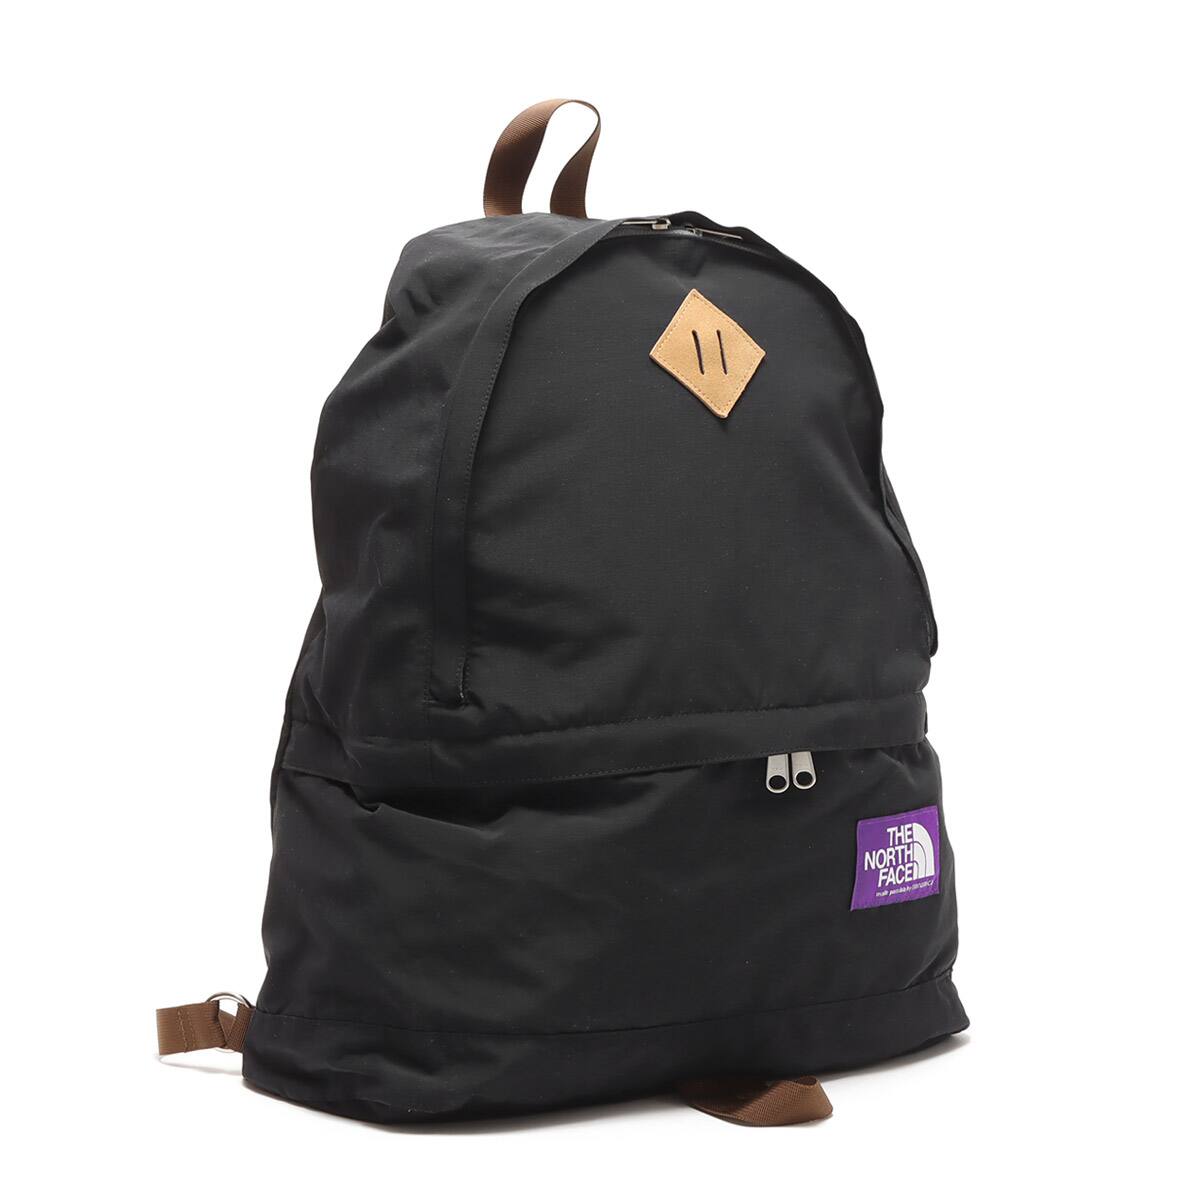 THE NORTH FACE PURPLE LABEL FIELD DAY PACK BLACK 22SS-I